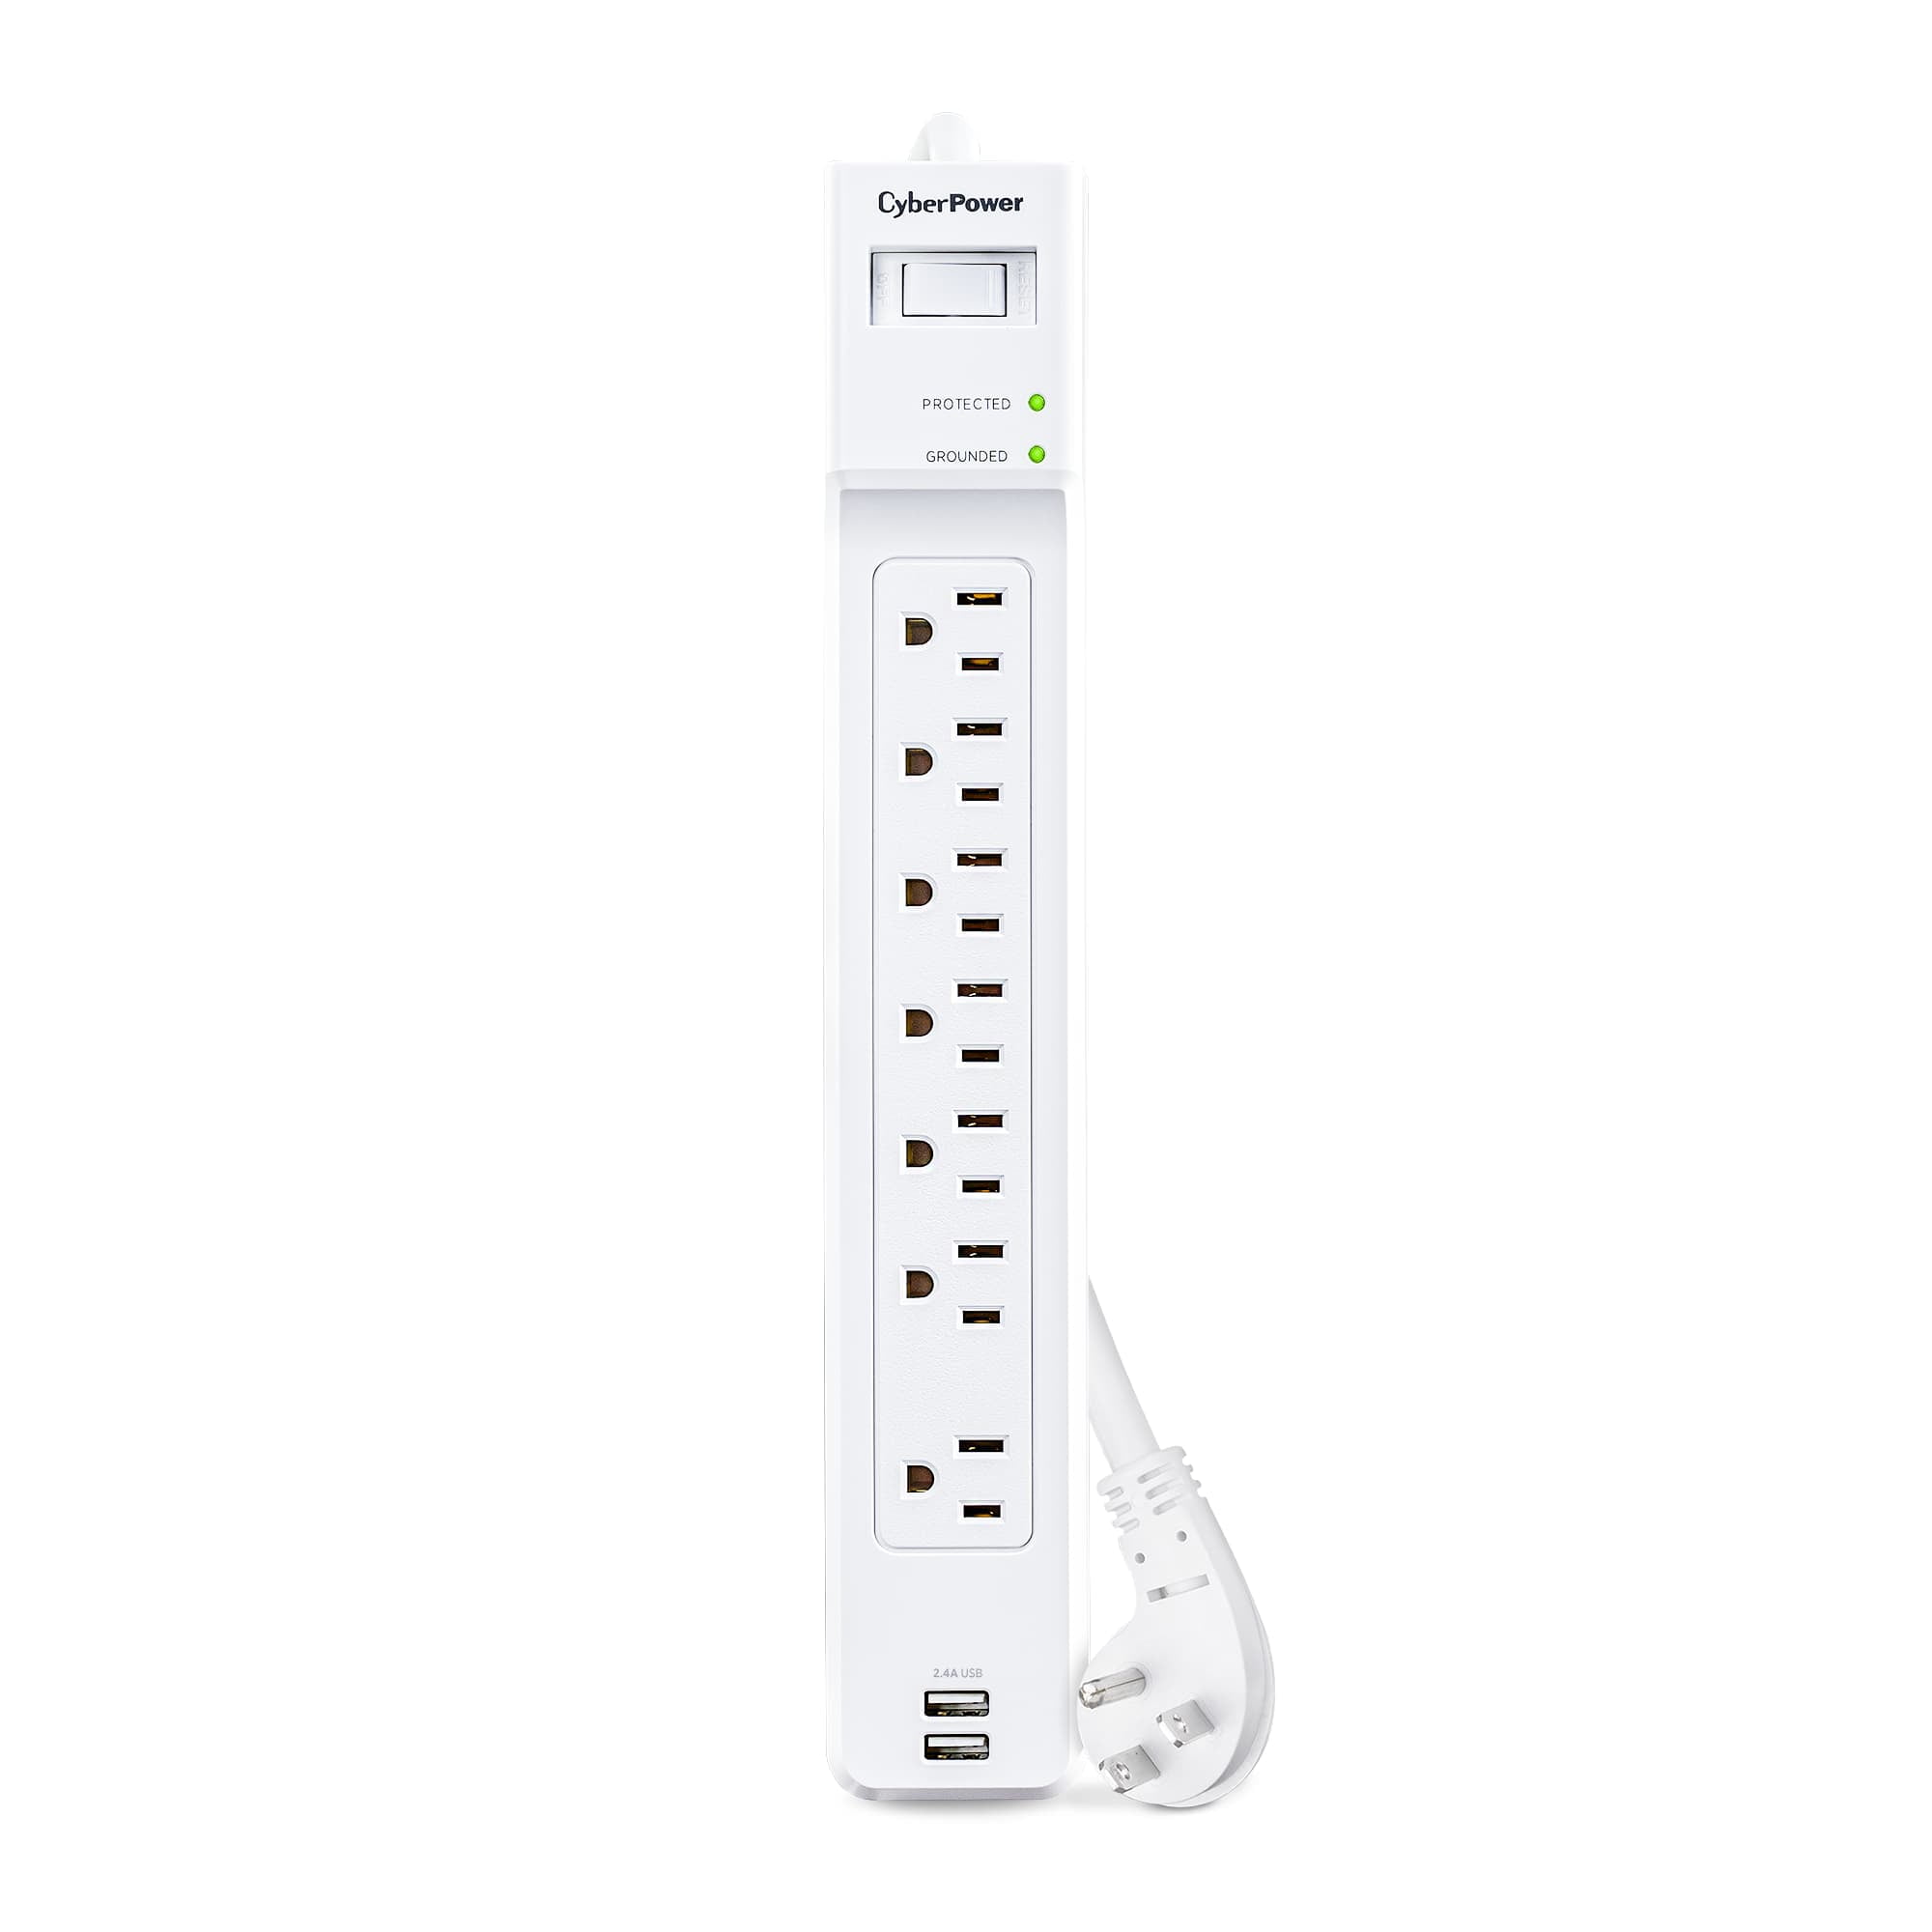 CyberPower Essential Series P703URC1 2,000 Joule Surge Protector with 2 USB-A Ports